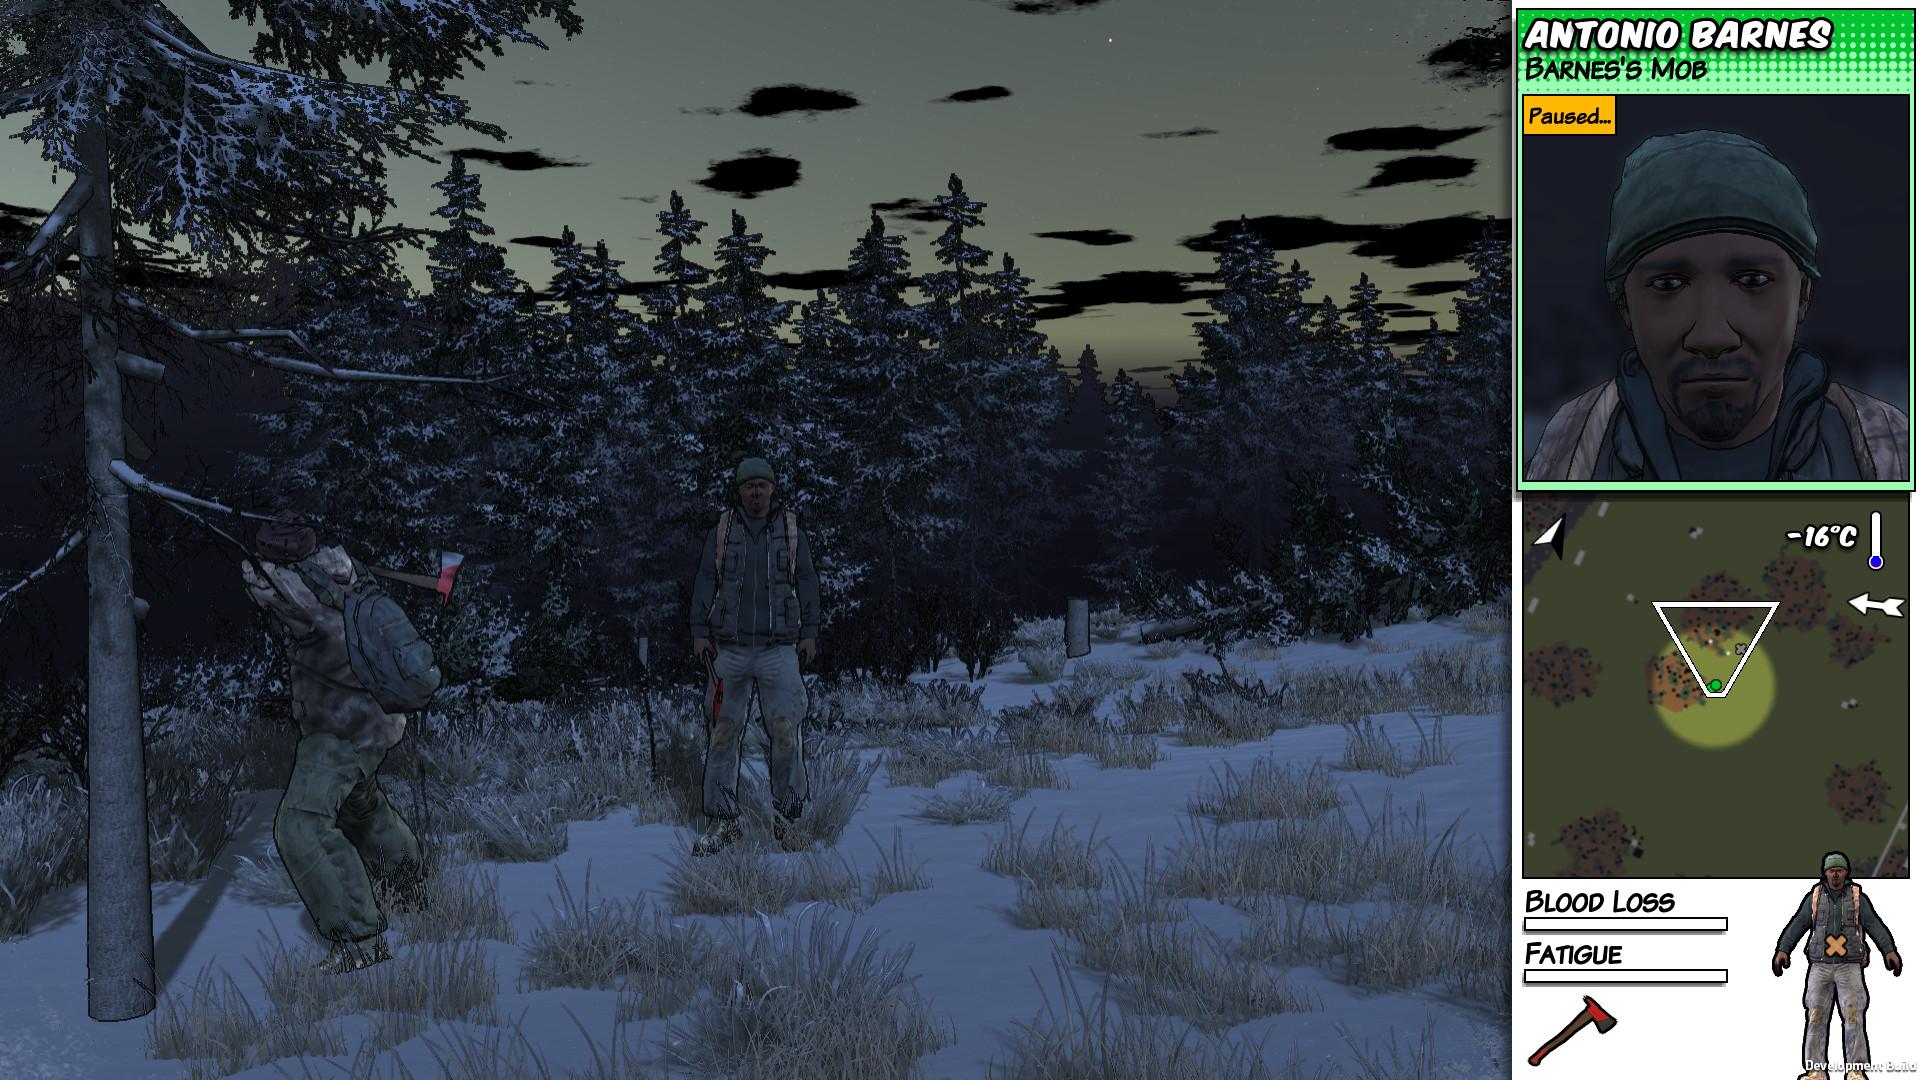 Screenshot №7 from game Survivalist: Invisible Strain